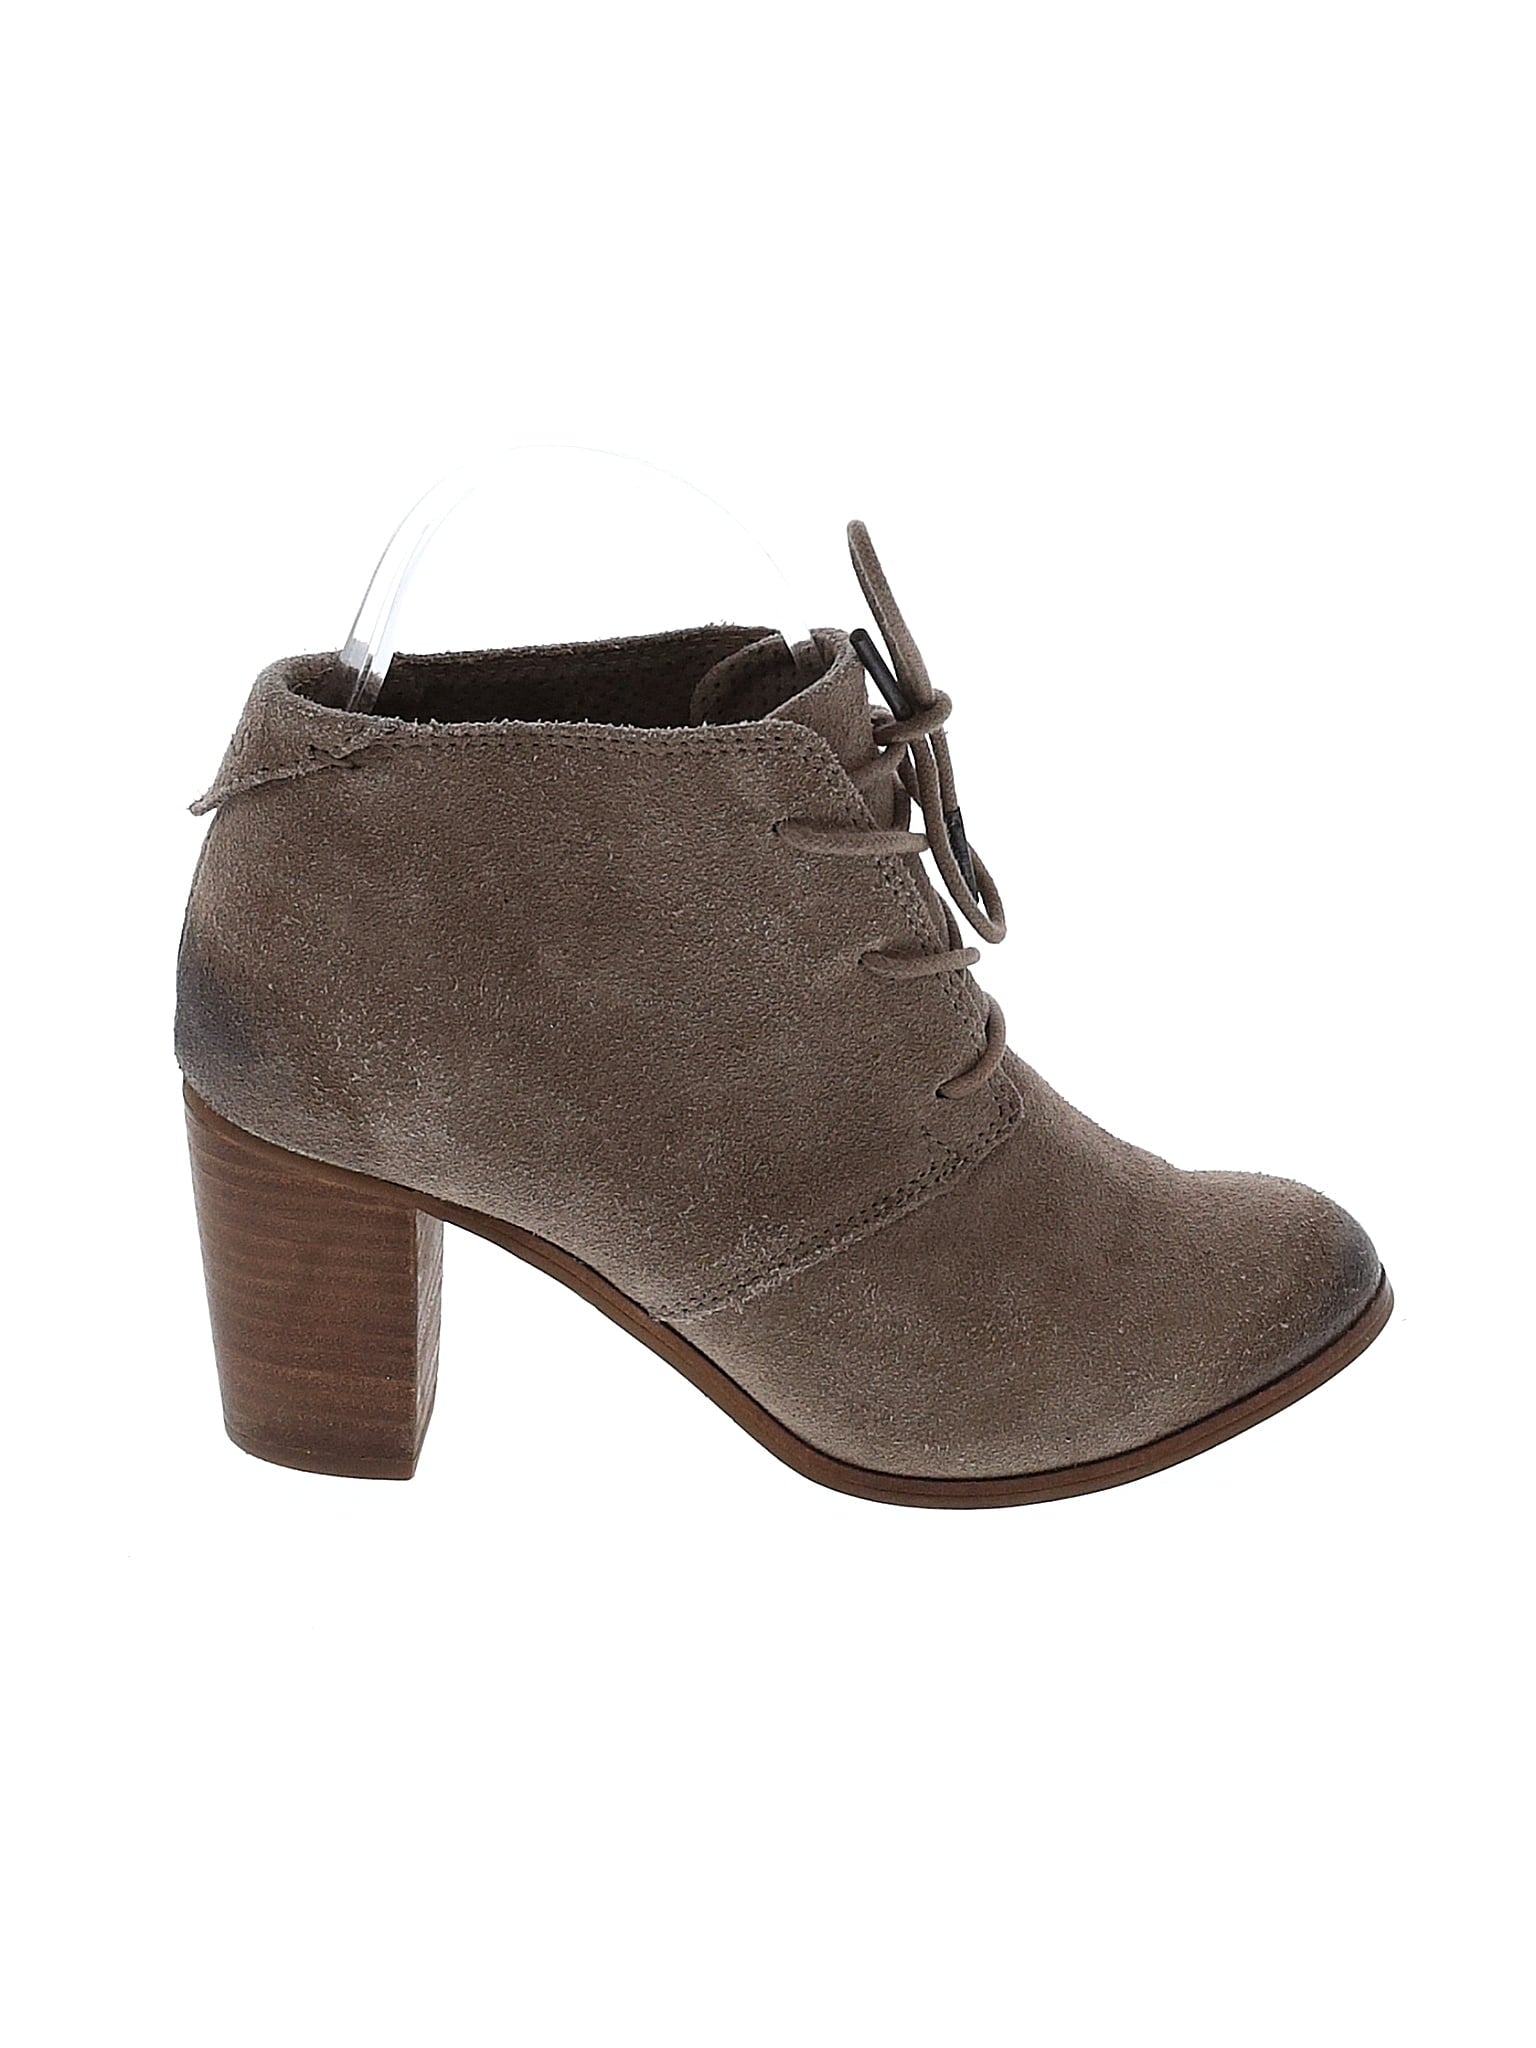 Ankle Boots shoe size - 6 1/2